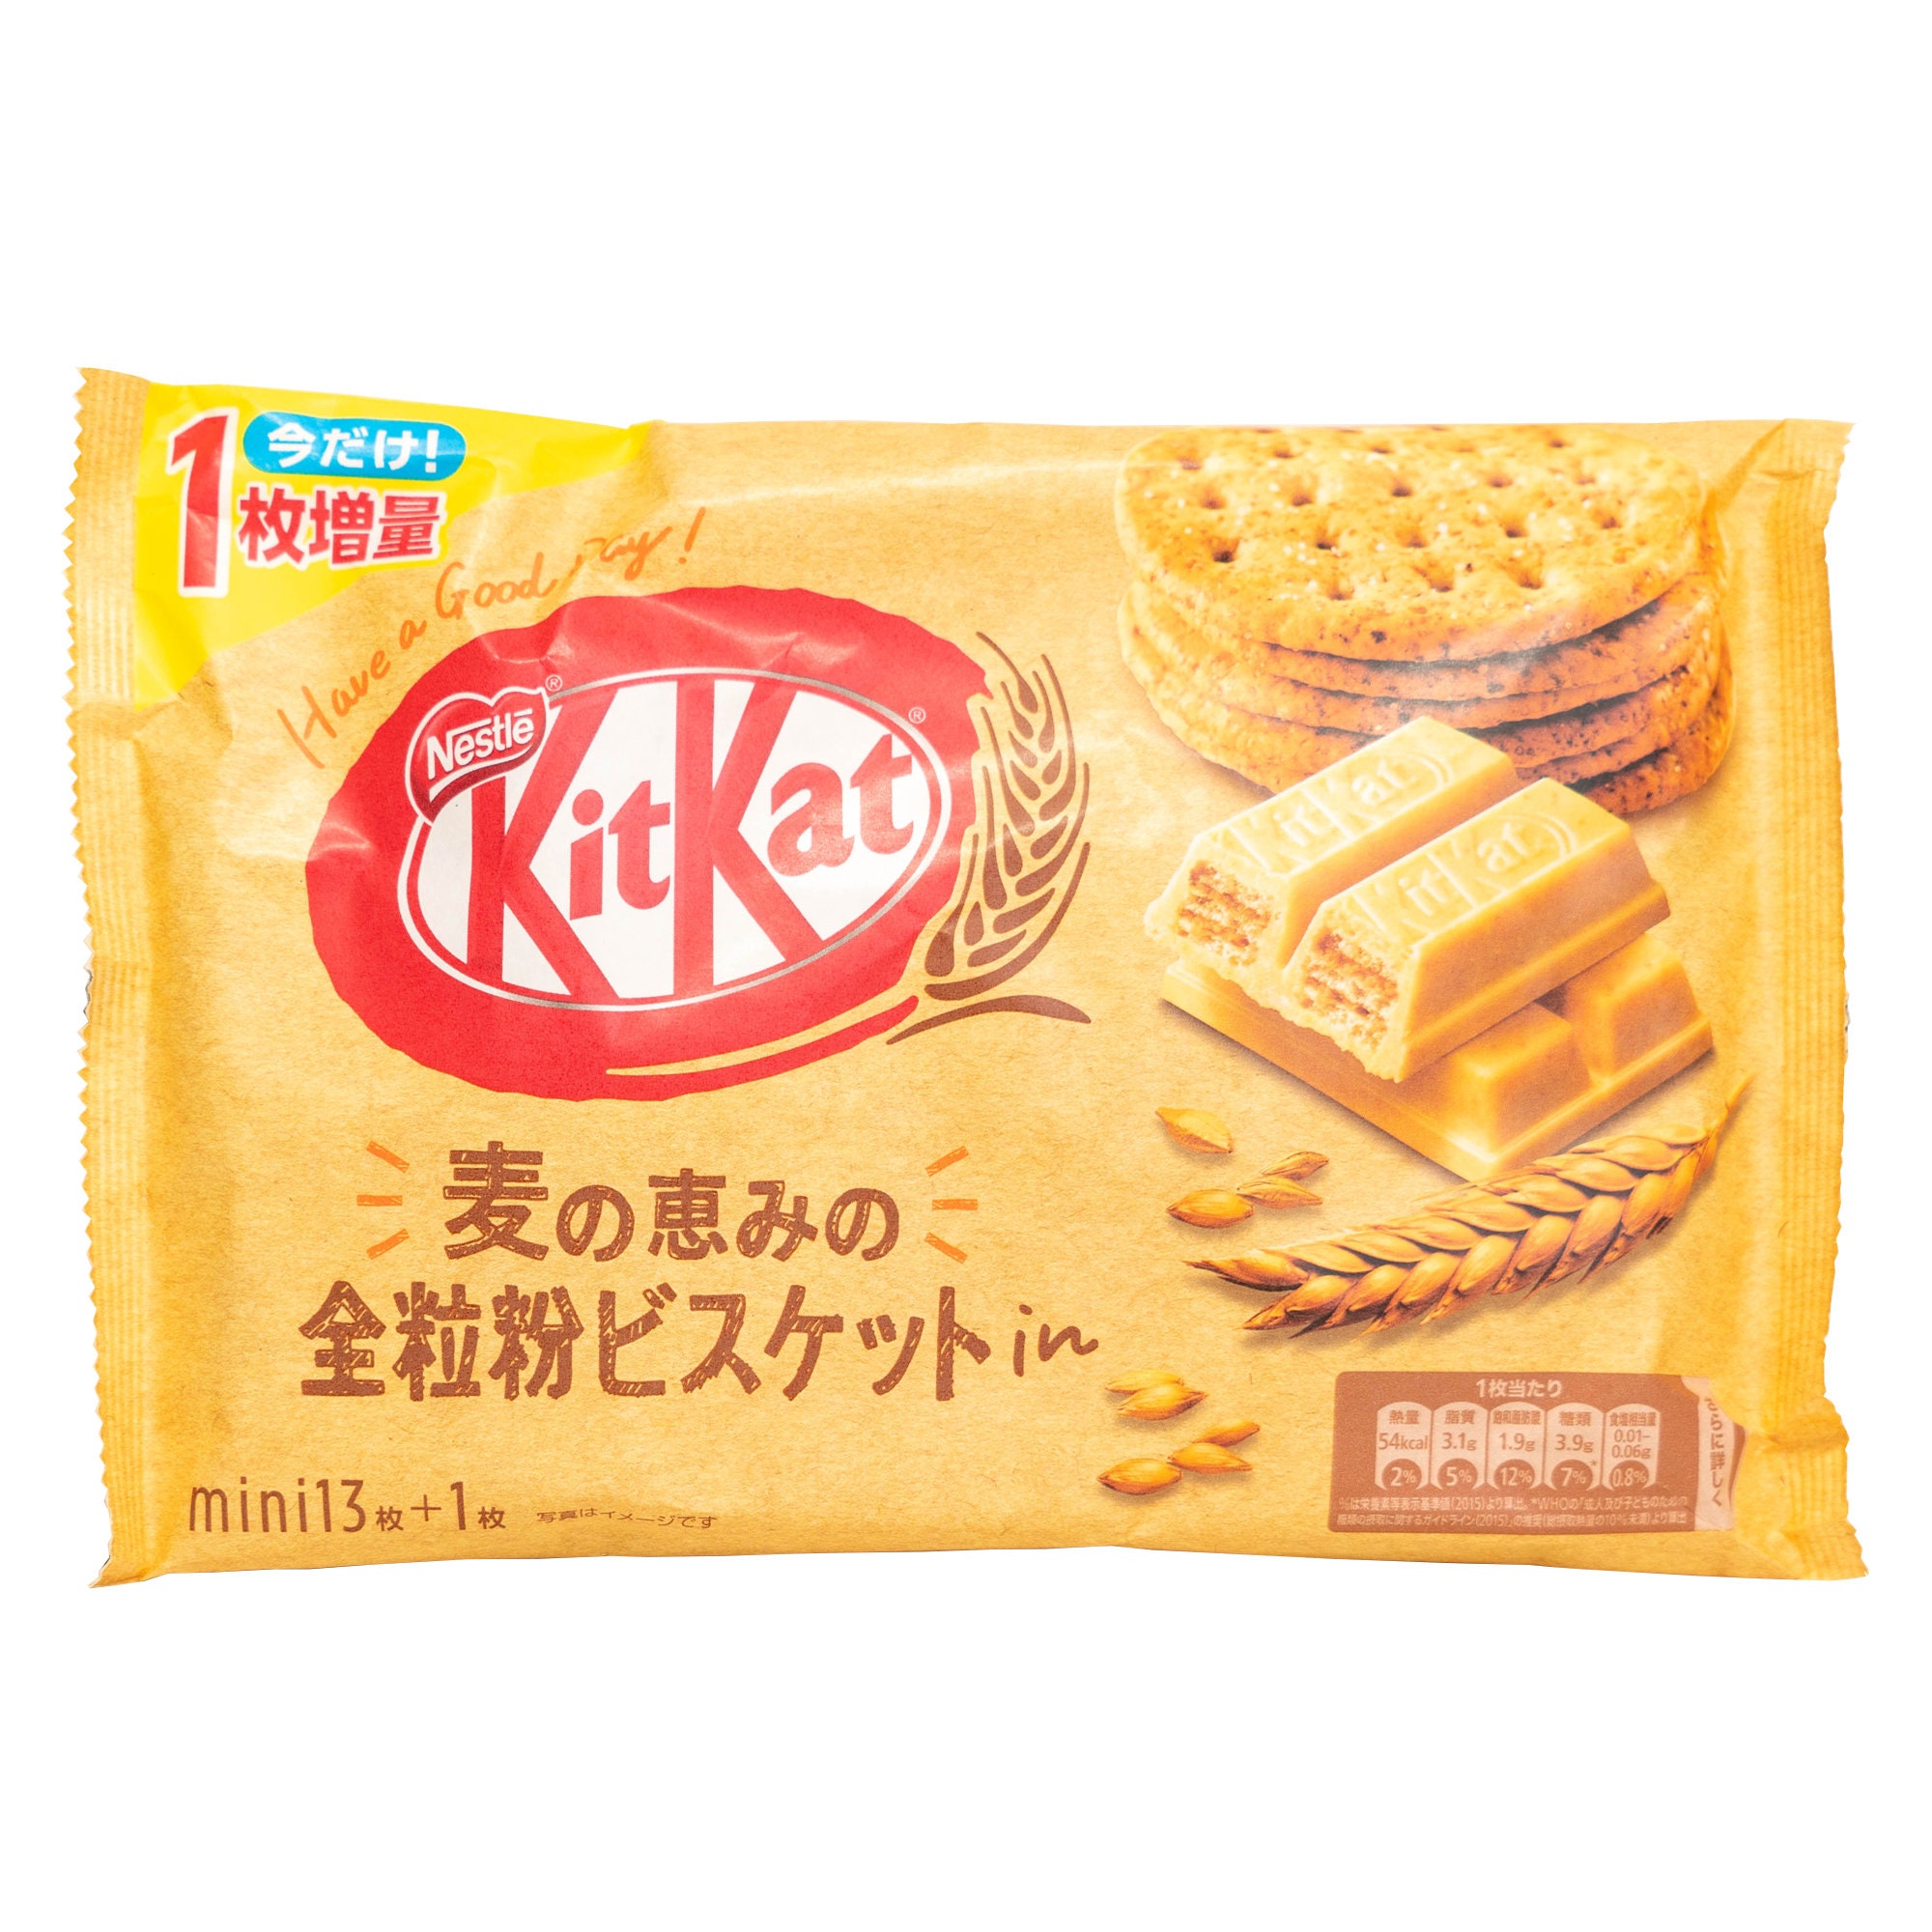 Japanese KitKat Whole Grain Biscuit | Etsy